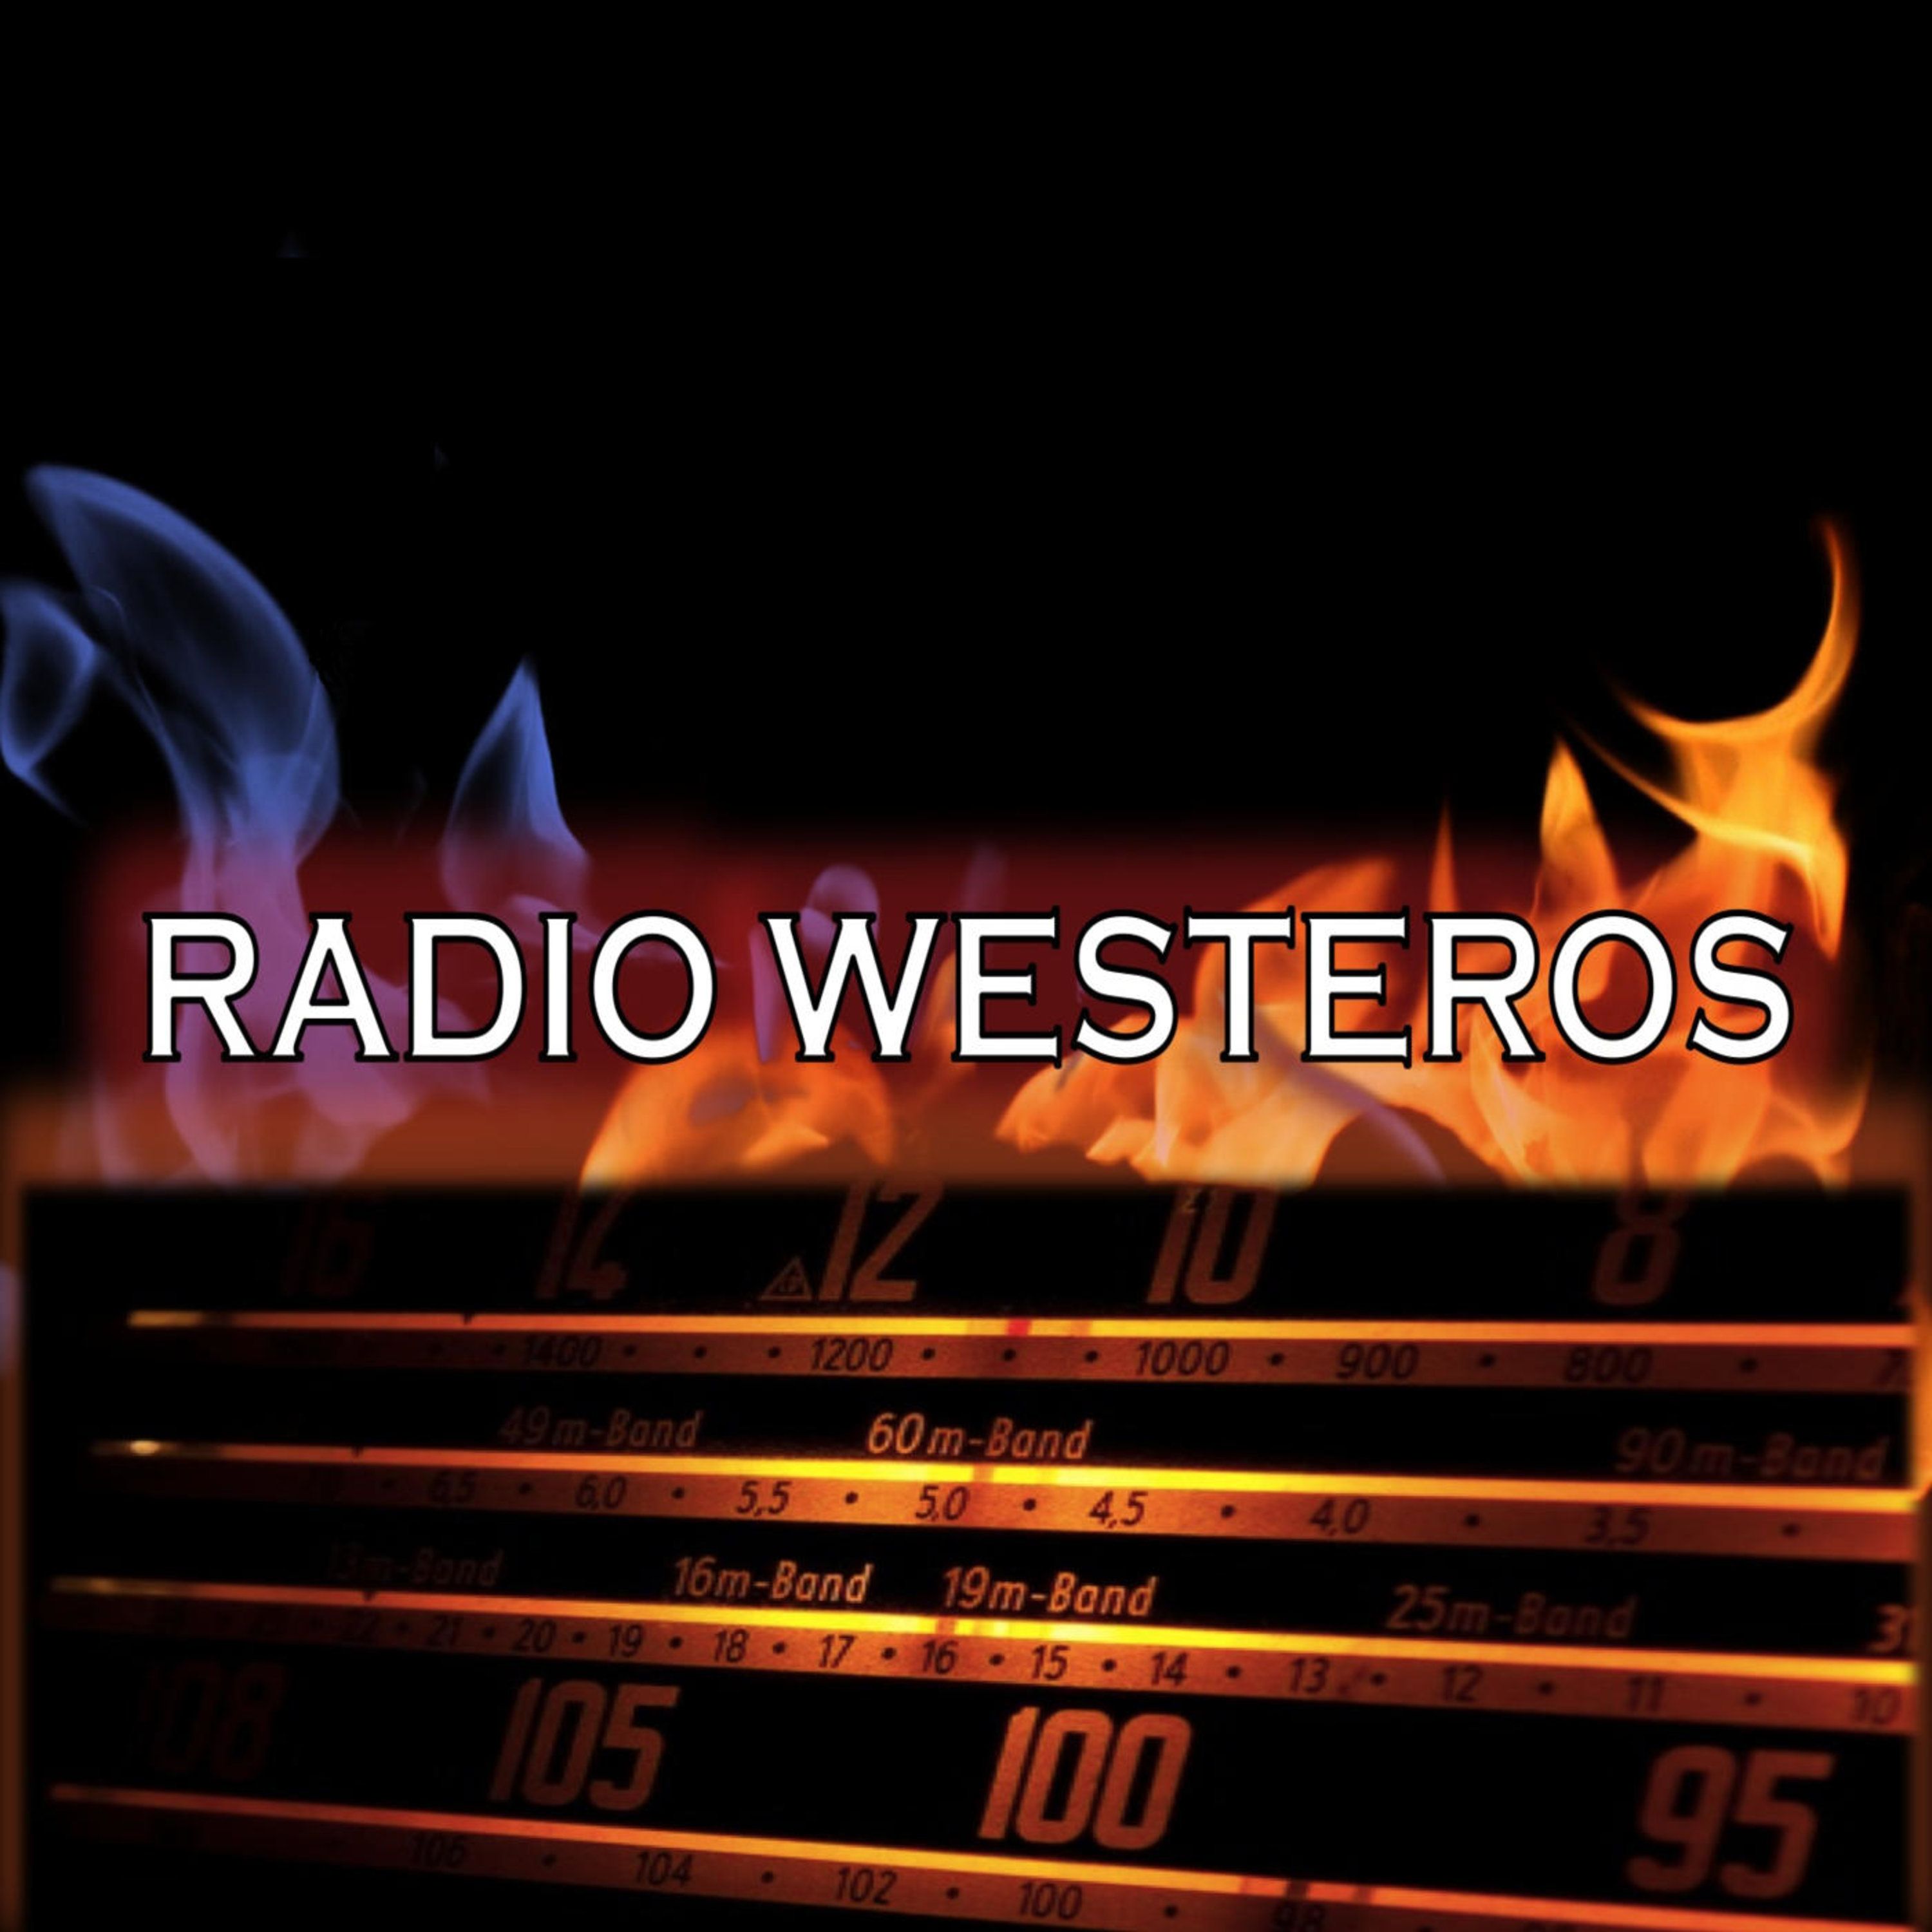 Radio Westeros E52 - w/History of Westeros - Dance of the Dragons, pt.2